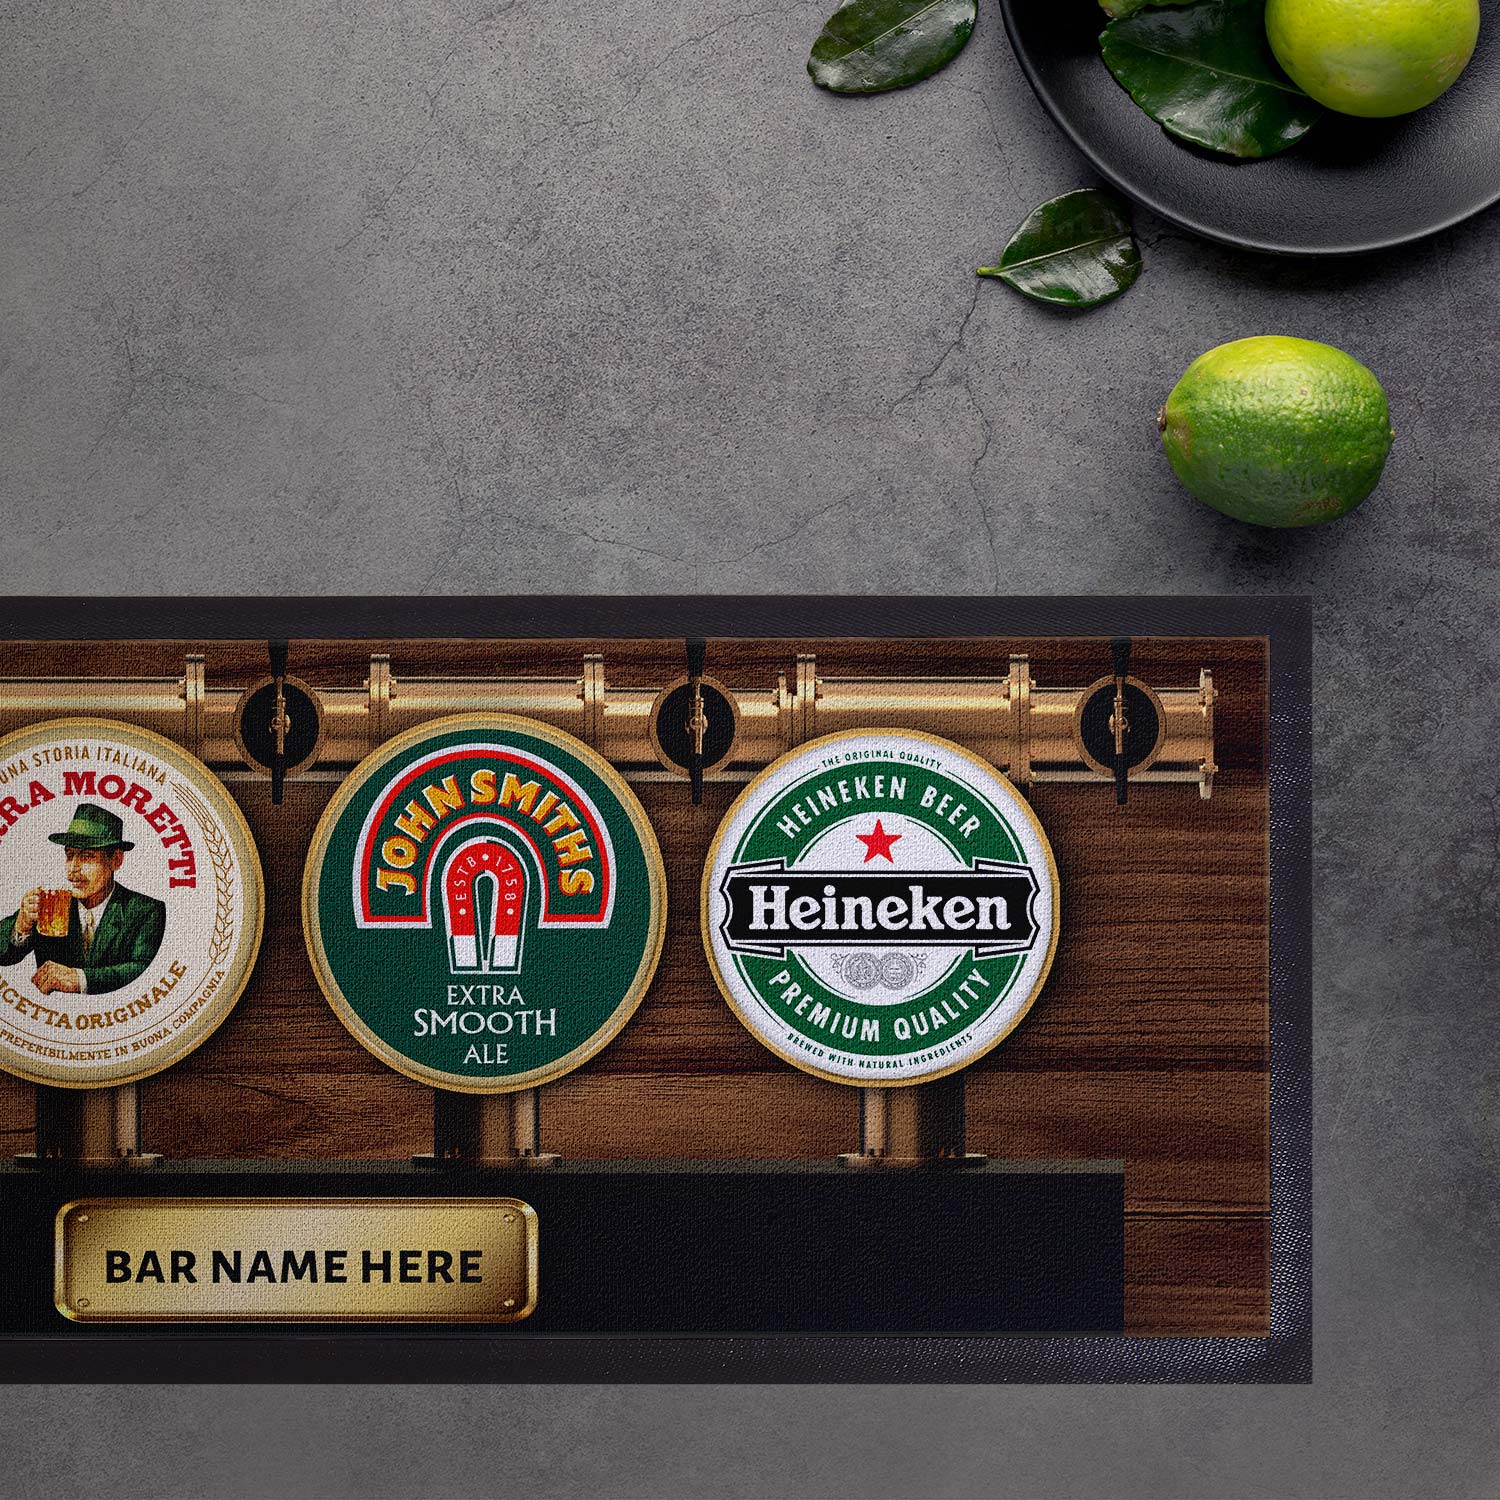 Pub Inspired - Beer Pumps - Personalised Text Bar Runner